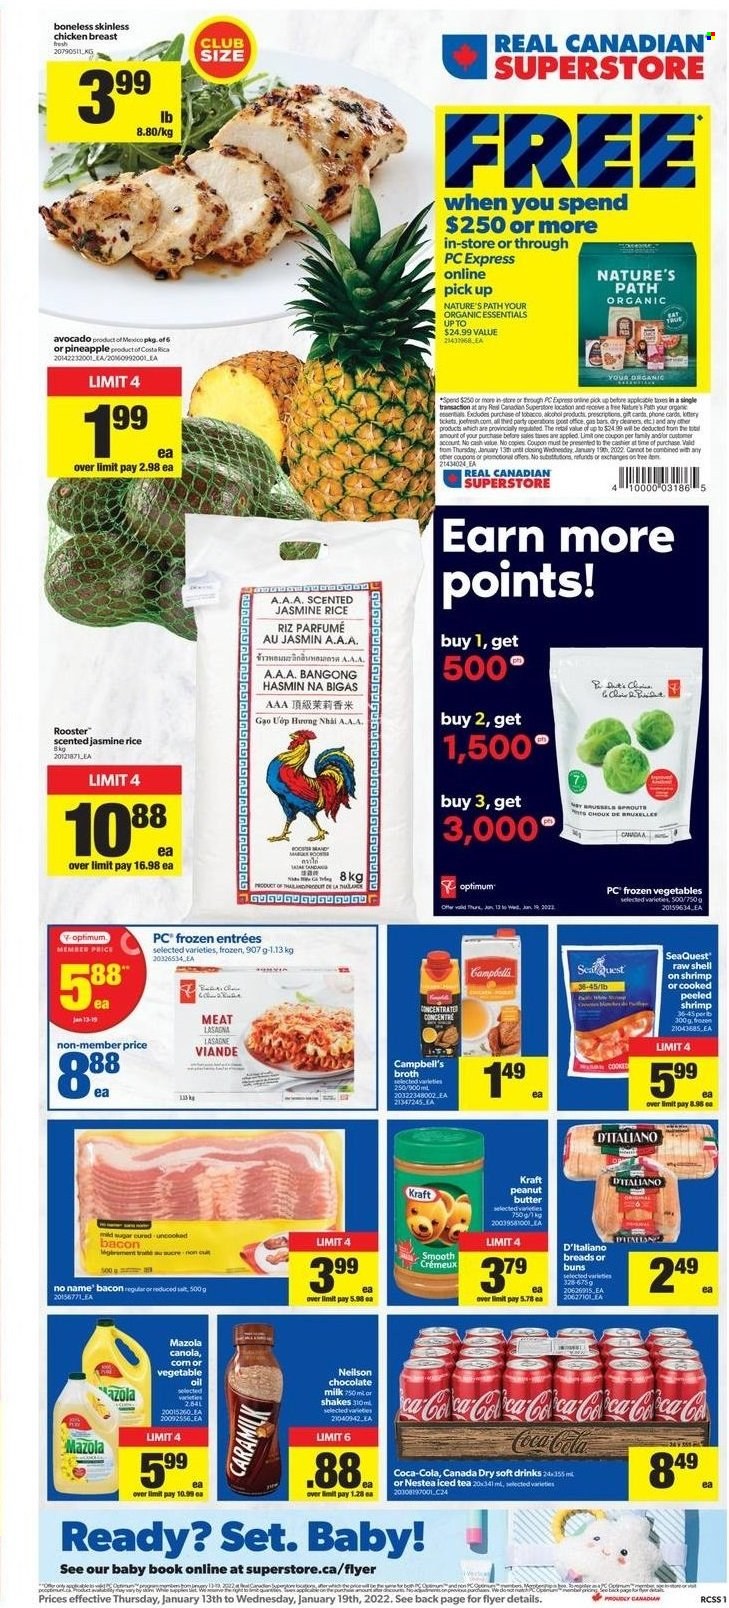 Real Canadian Superstore Flyer - January 13, 2022 - January 19, 2022 - Sales products - buns, avocado, No Name, Campbell's, lasagna meal, Kraft®, bacon, milk, shakes, frozen vegetables, milk chocolate, chocolate, broth, rice, jasmine rice, oil, peanut butter, Canada Dry, Coca-Cola, ice tea, soft drink, alcohol, chicken breasts, chicken meat, book, Optimum, essentials. Page 1.